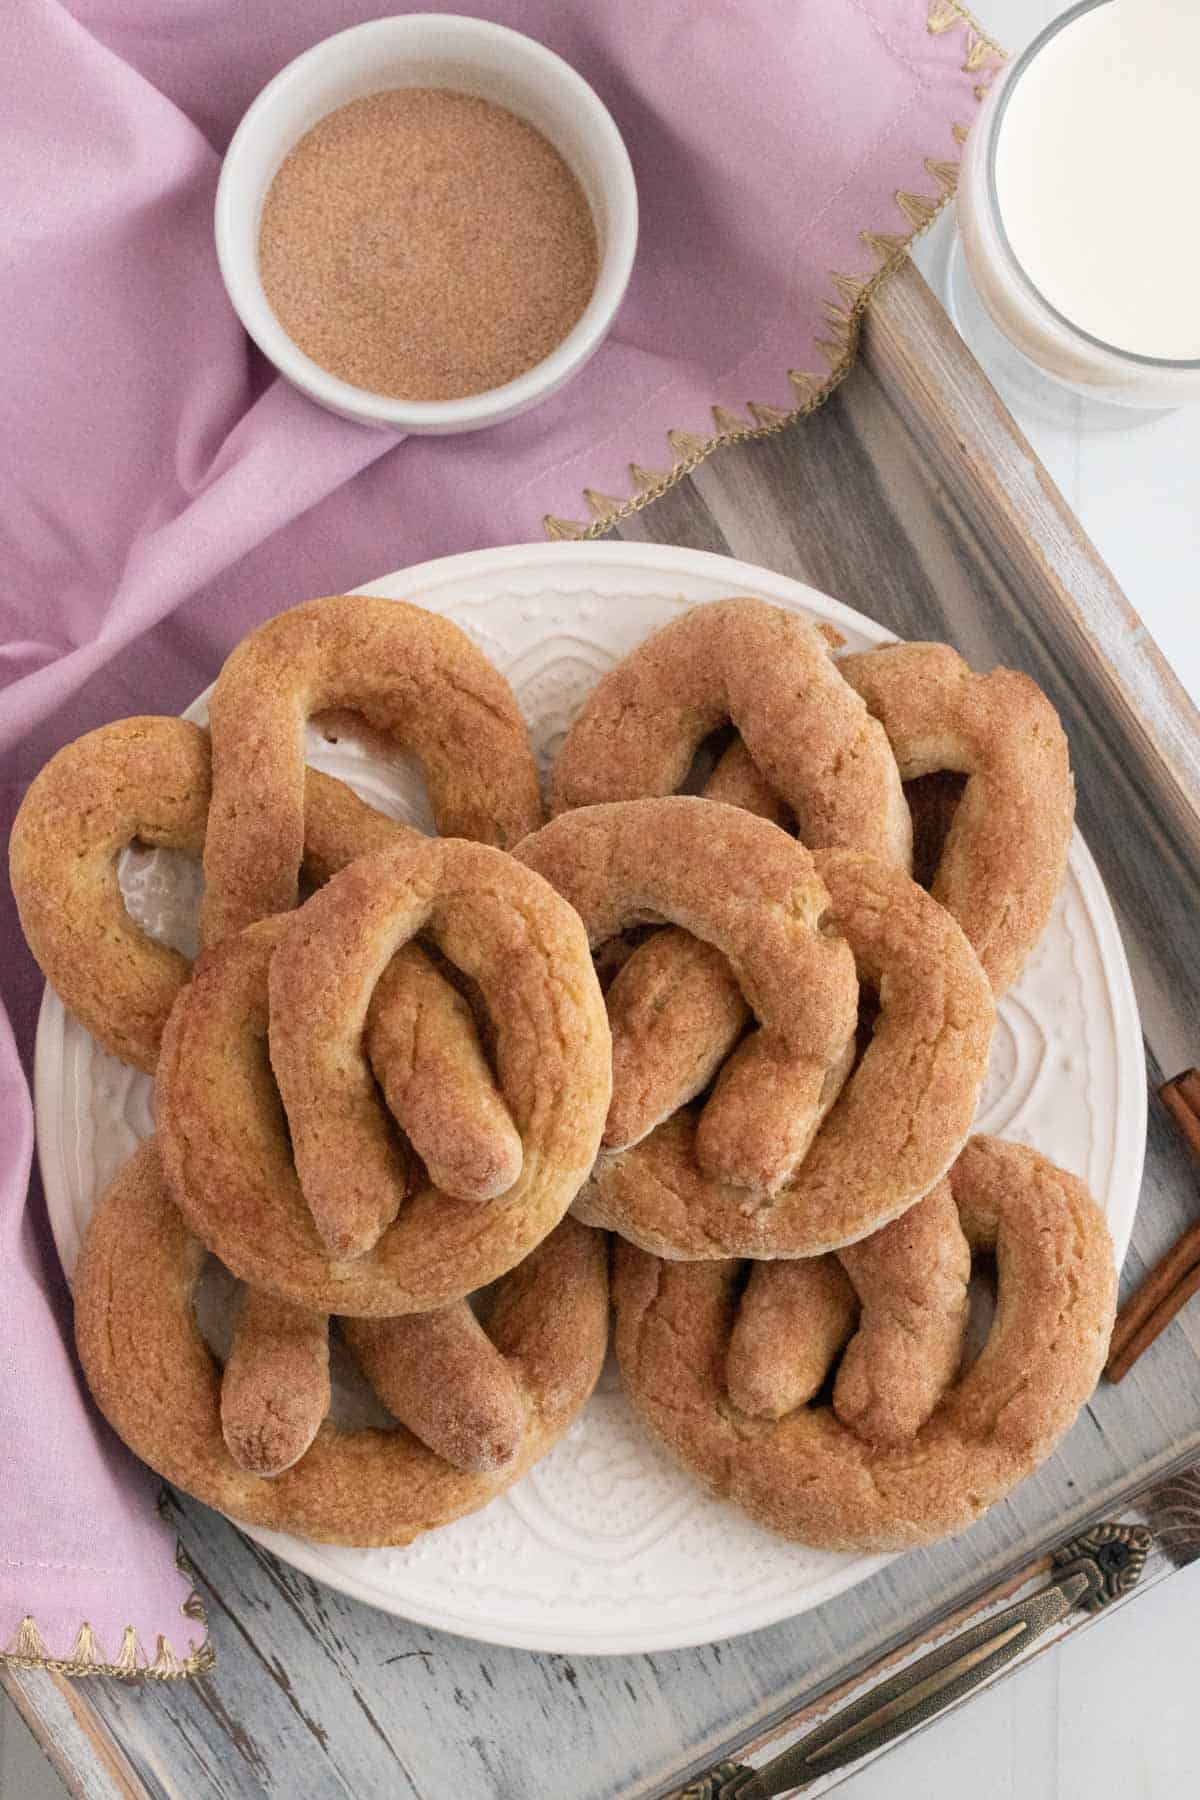 A plate of cinnamon sugar pretzels on a wooden tray with a bowl of cinnamon sugar.